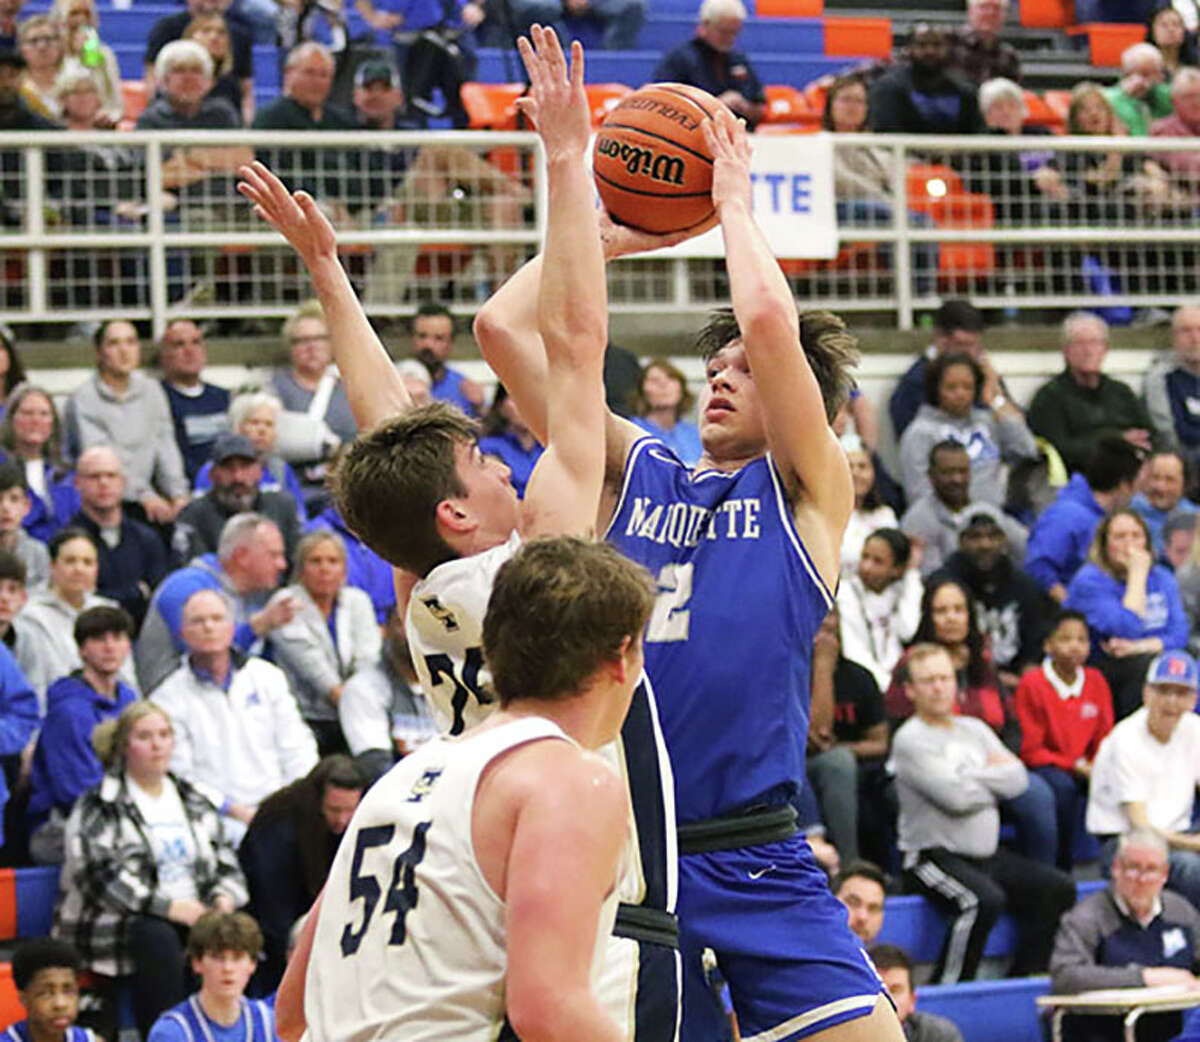 Marquette Catholic junior Braden Kline shoots over Teutopolis' James Niebrugge with the Wooden Shoe's Caleb Siemer (54) also defending the lane in a March 1 semifinal of the Newton Class 2A Sectional. Kline is the 2022-23 Telegraph Small-Schools Boys Basketball Player of the Year.